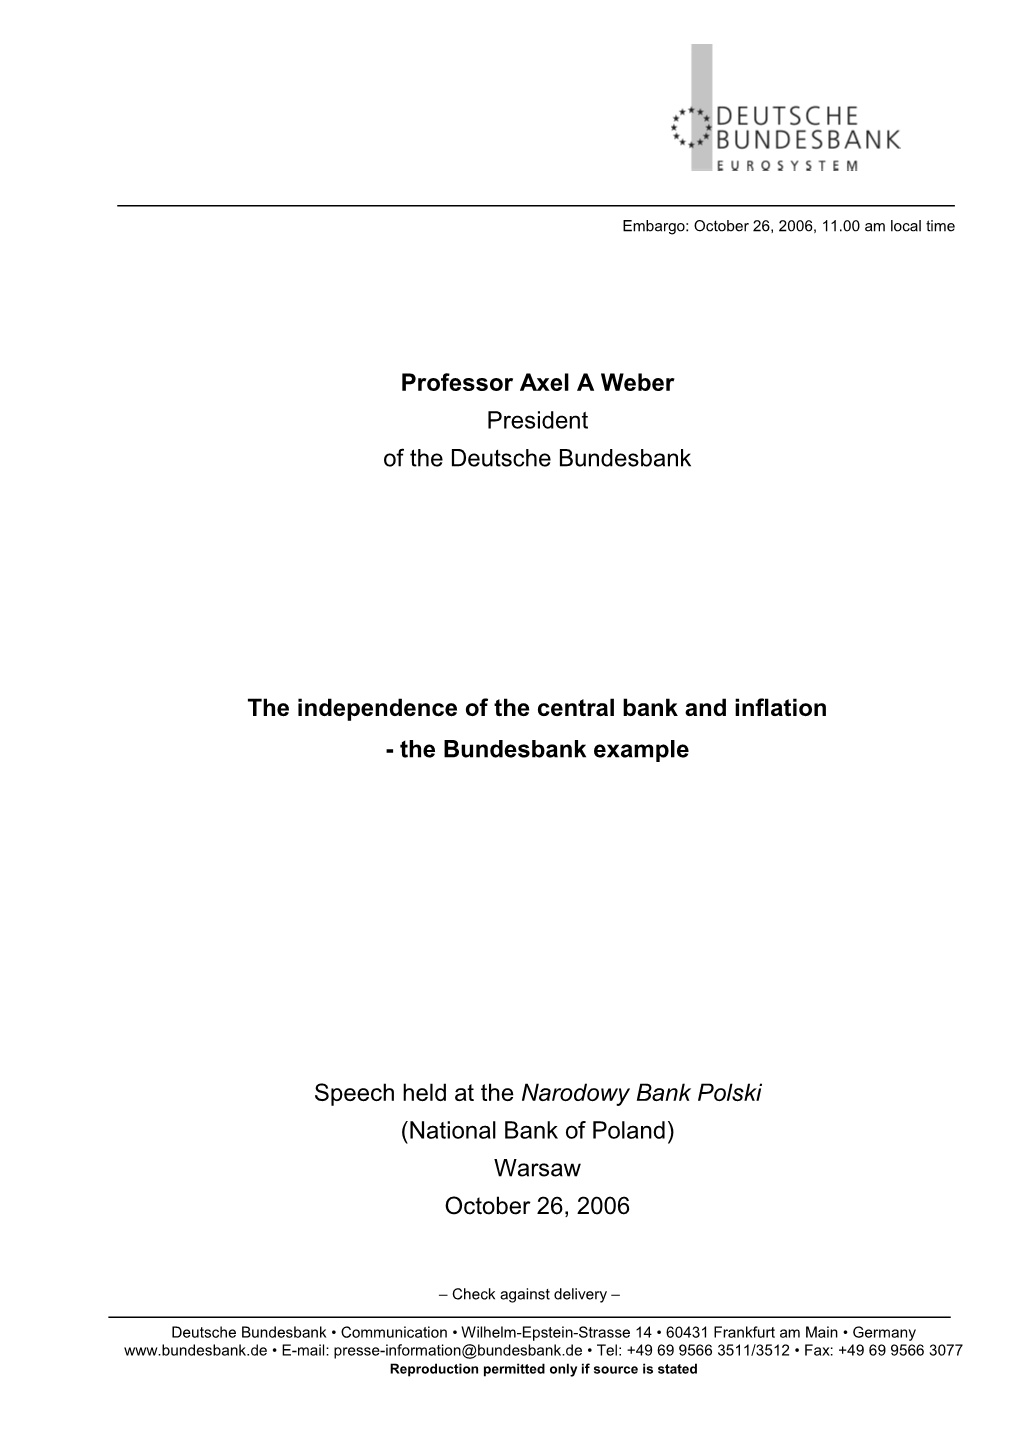 The Independence of the Central Bank and Inflation - the Bundesbank Example